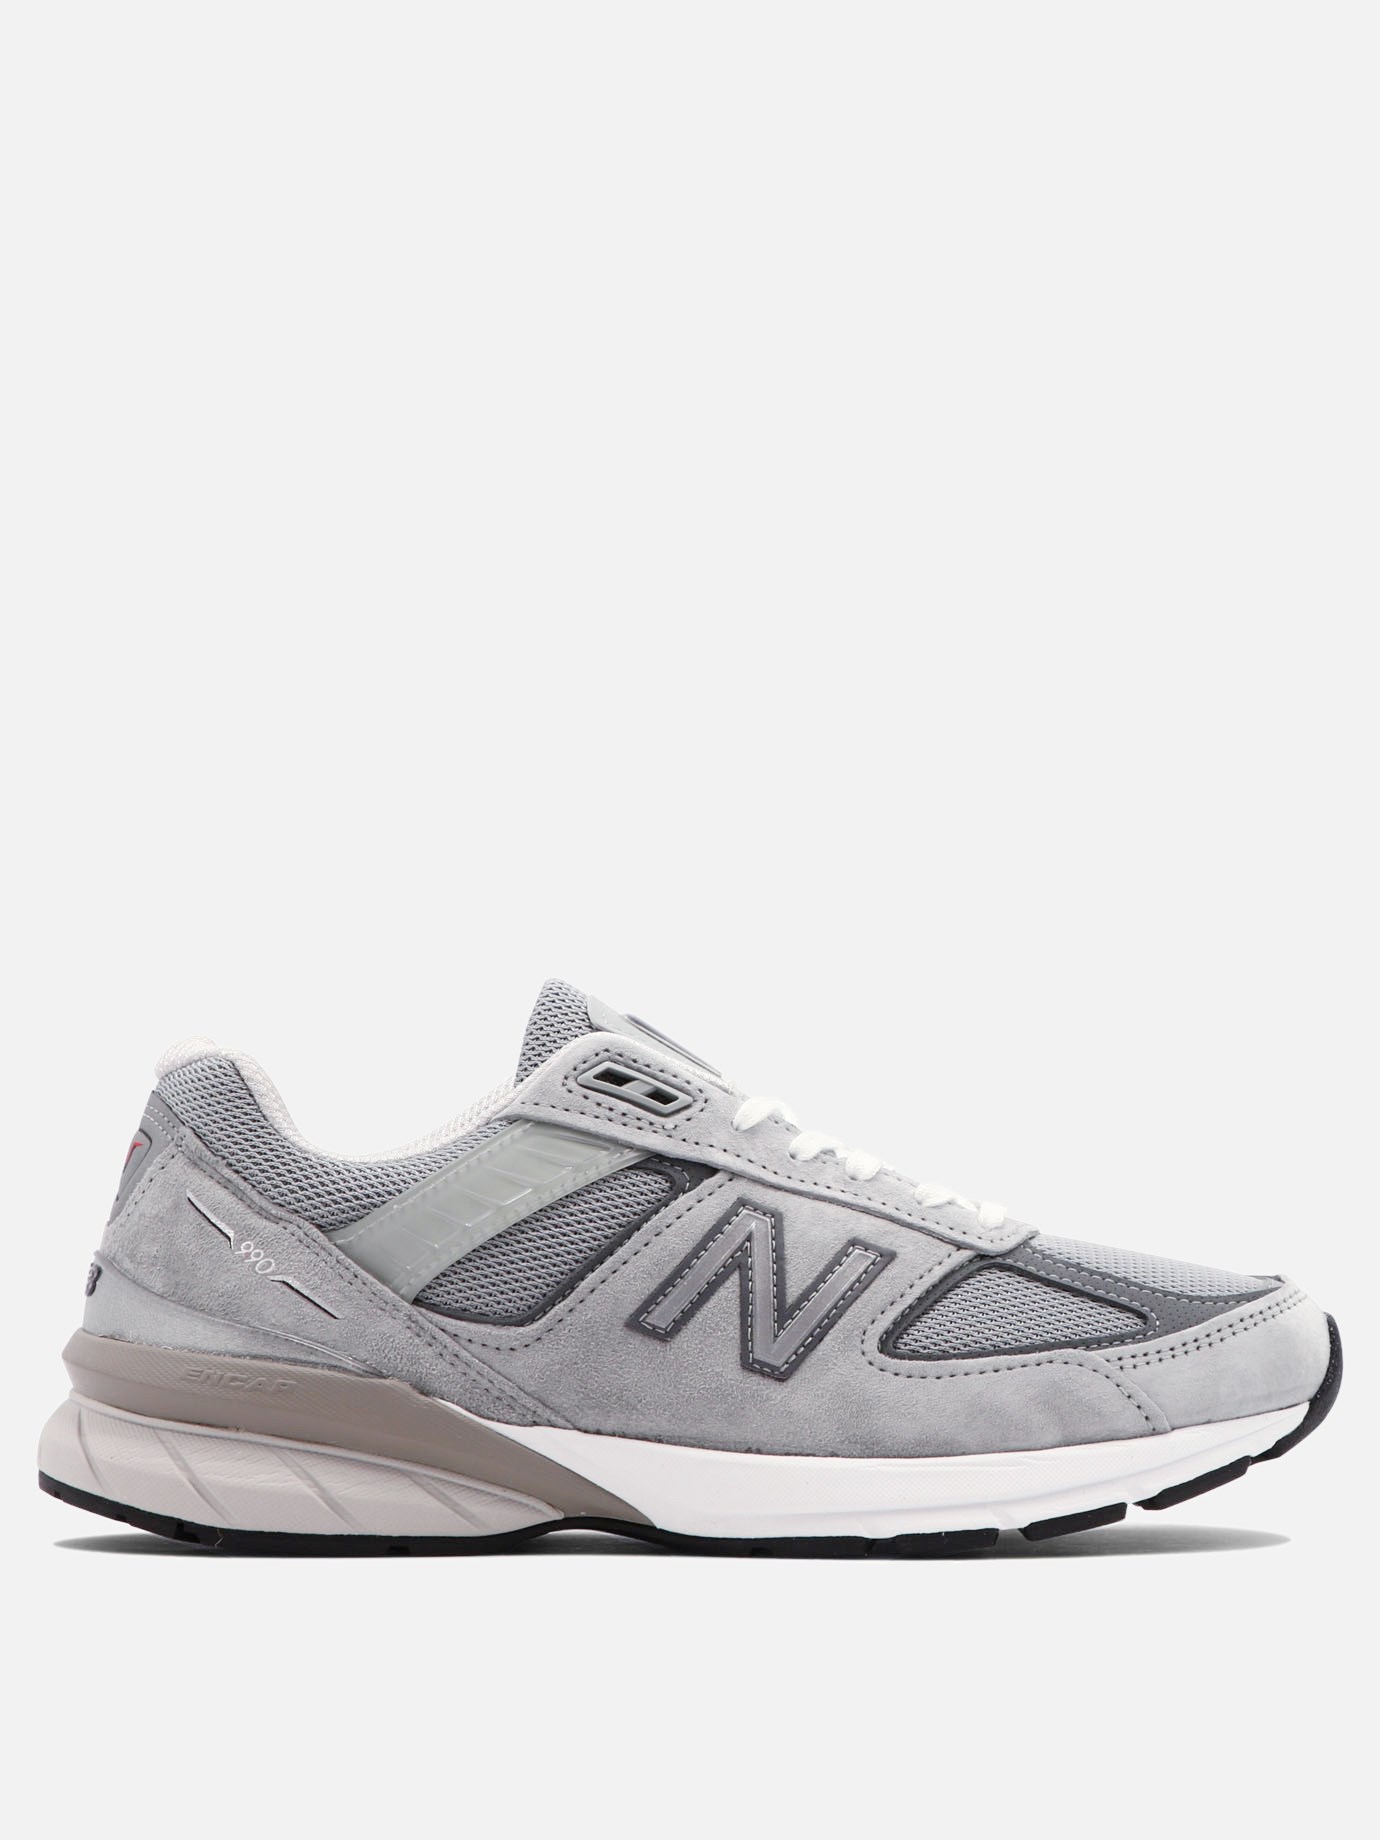  M990  sneakers by New Balance